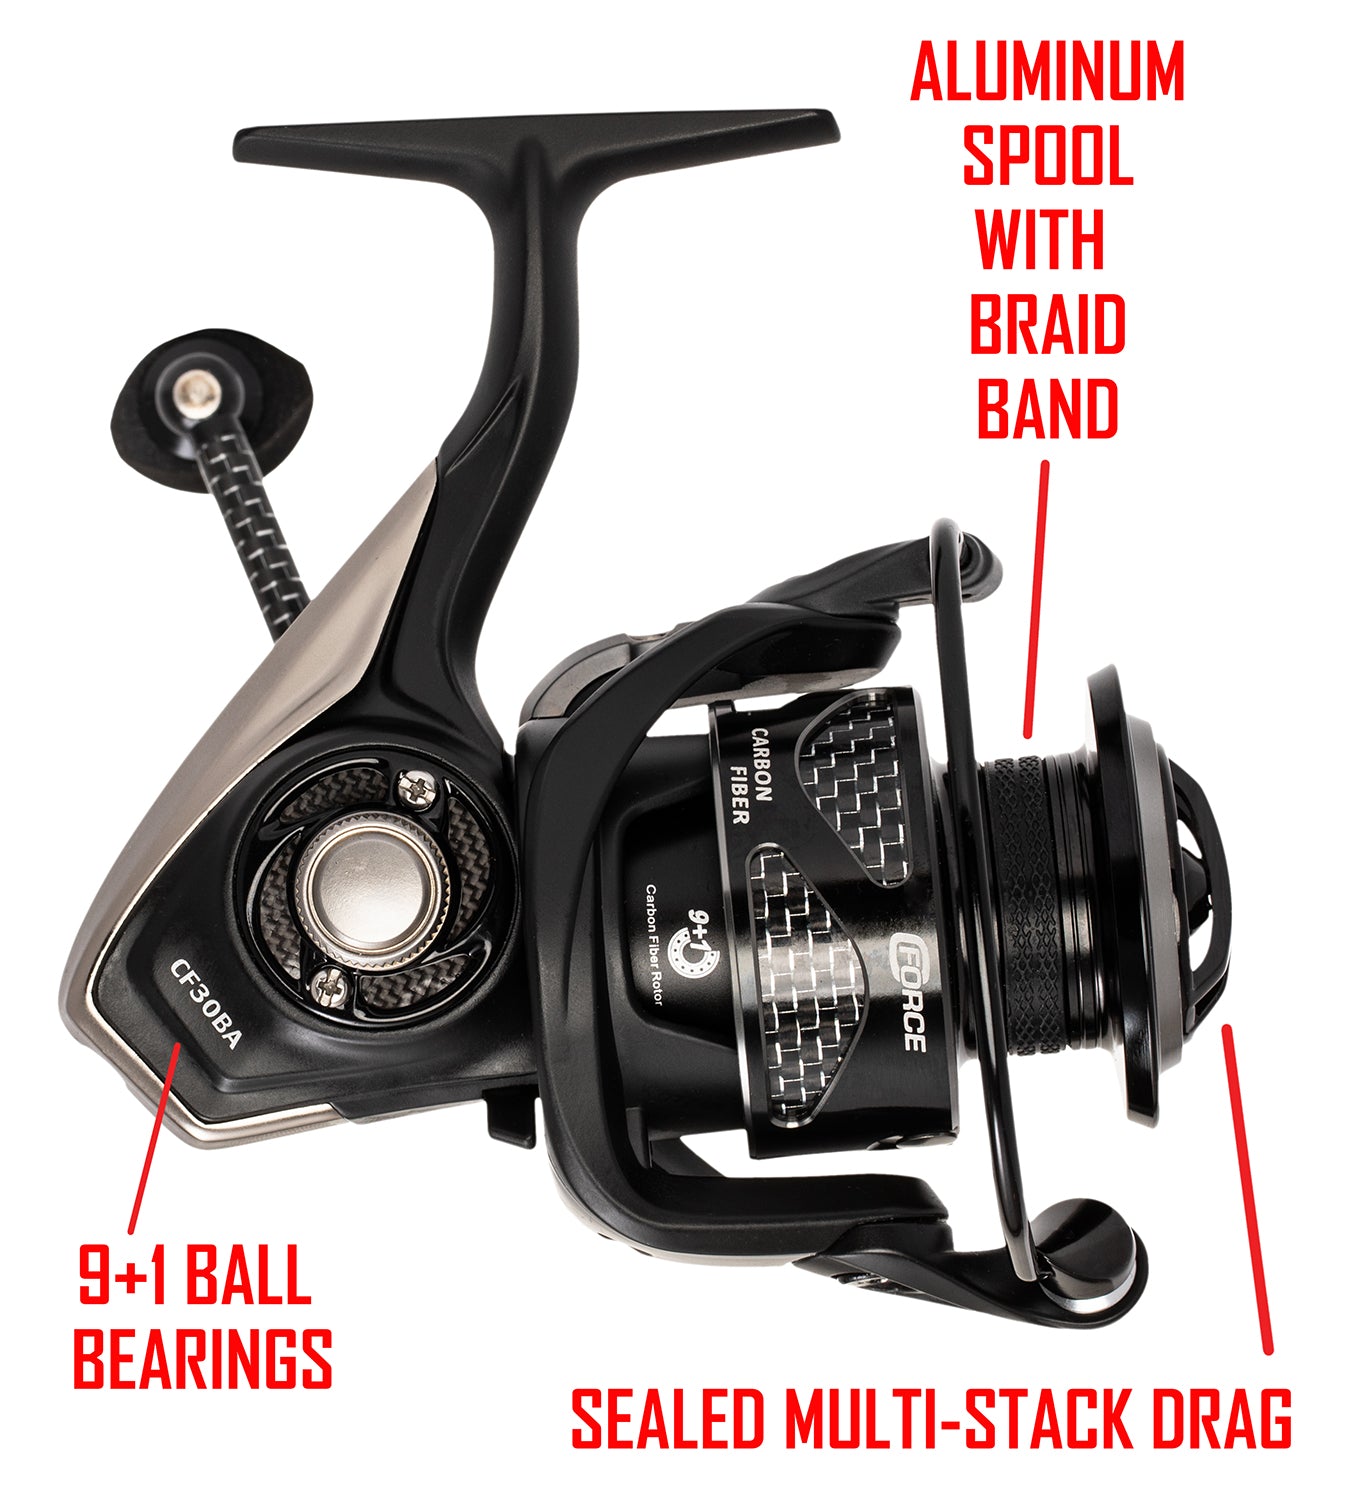 Black C-FORCE SPINNING REEL. RED text: 9+1 BALL BEARINGS, ALUMINUM SPOOL WITH BRAID BAND, SEALED MULTI-STACK DRAG